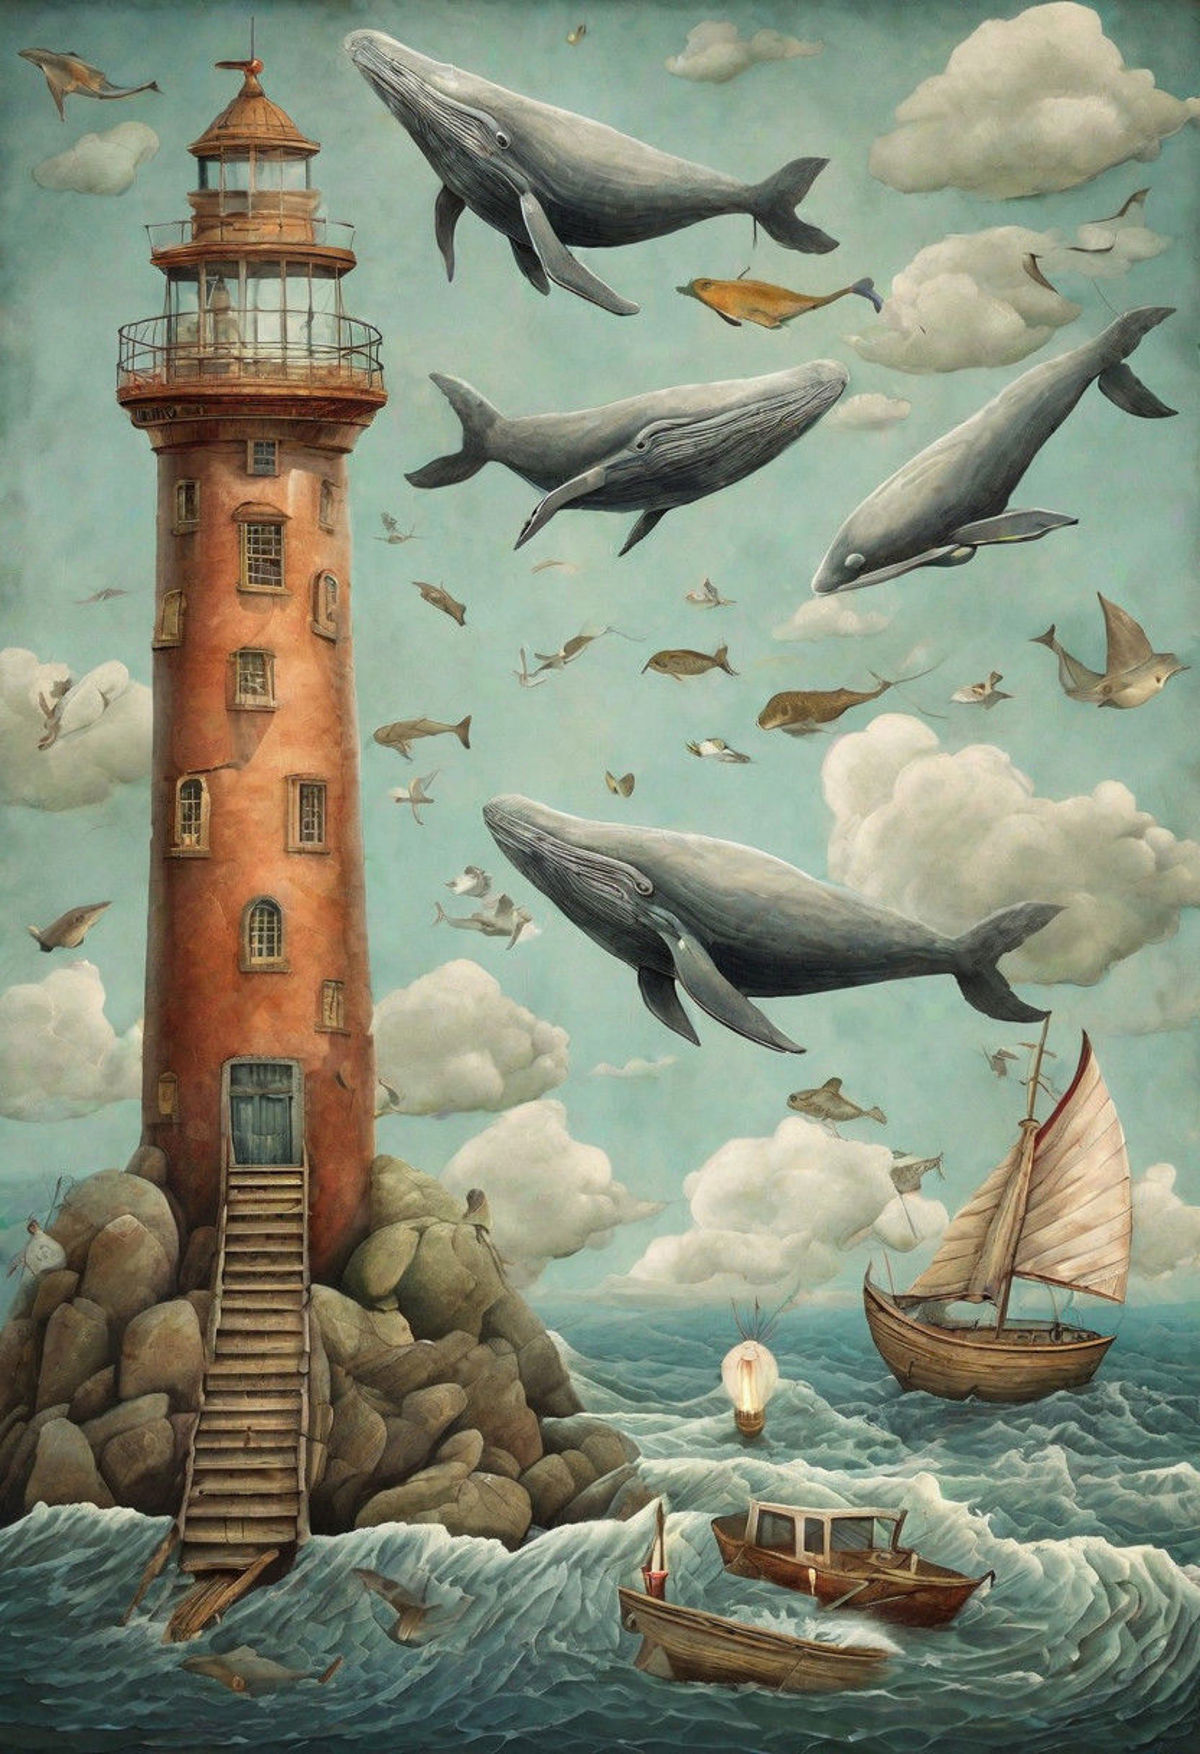 A painting of a lighthouse with whales and a boat.